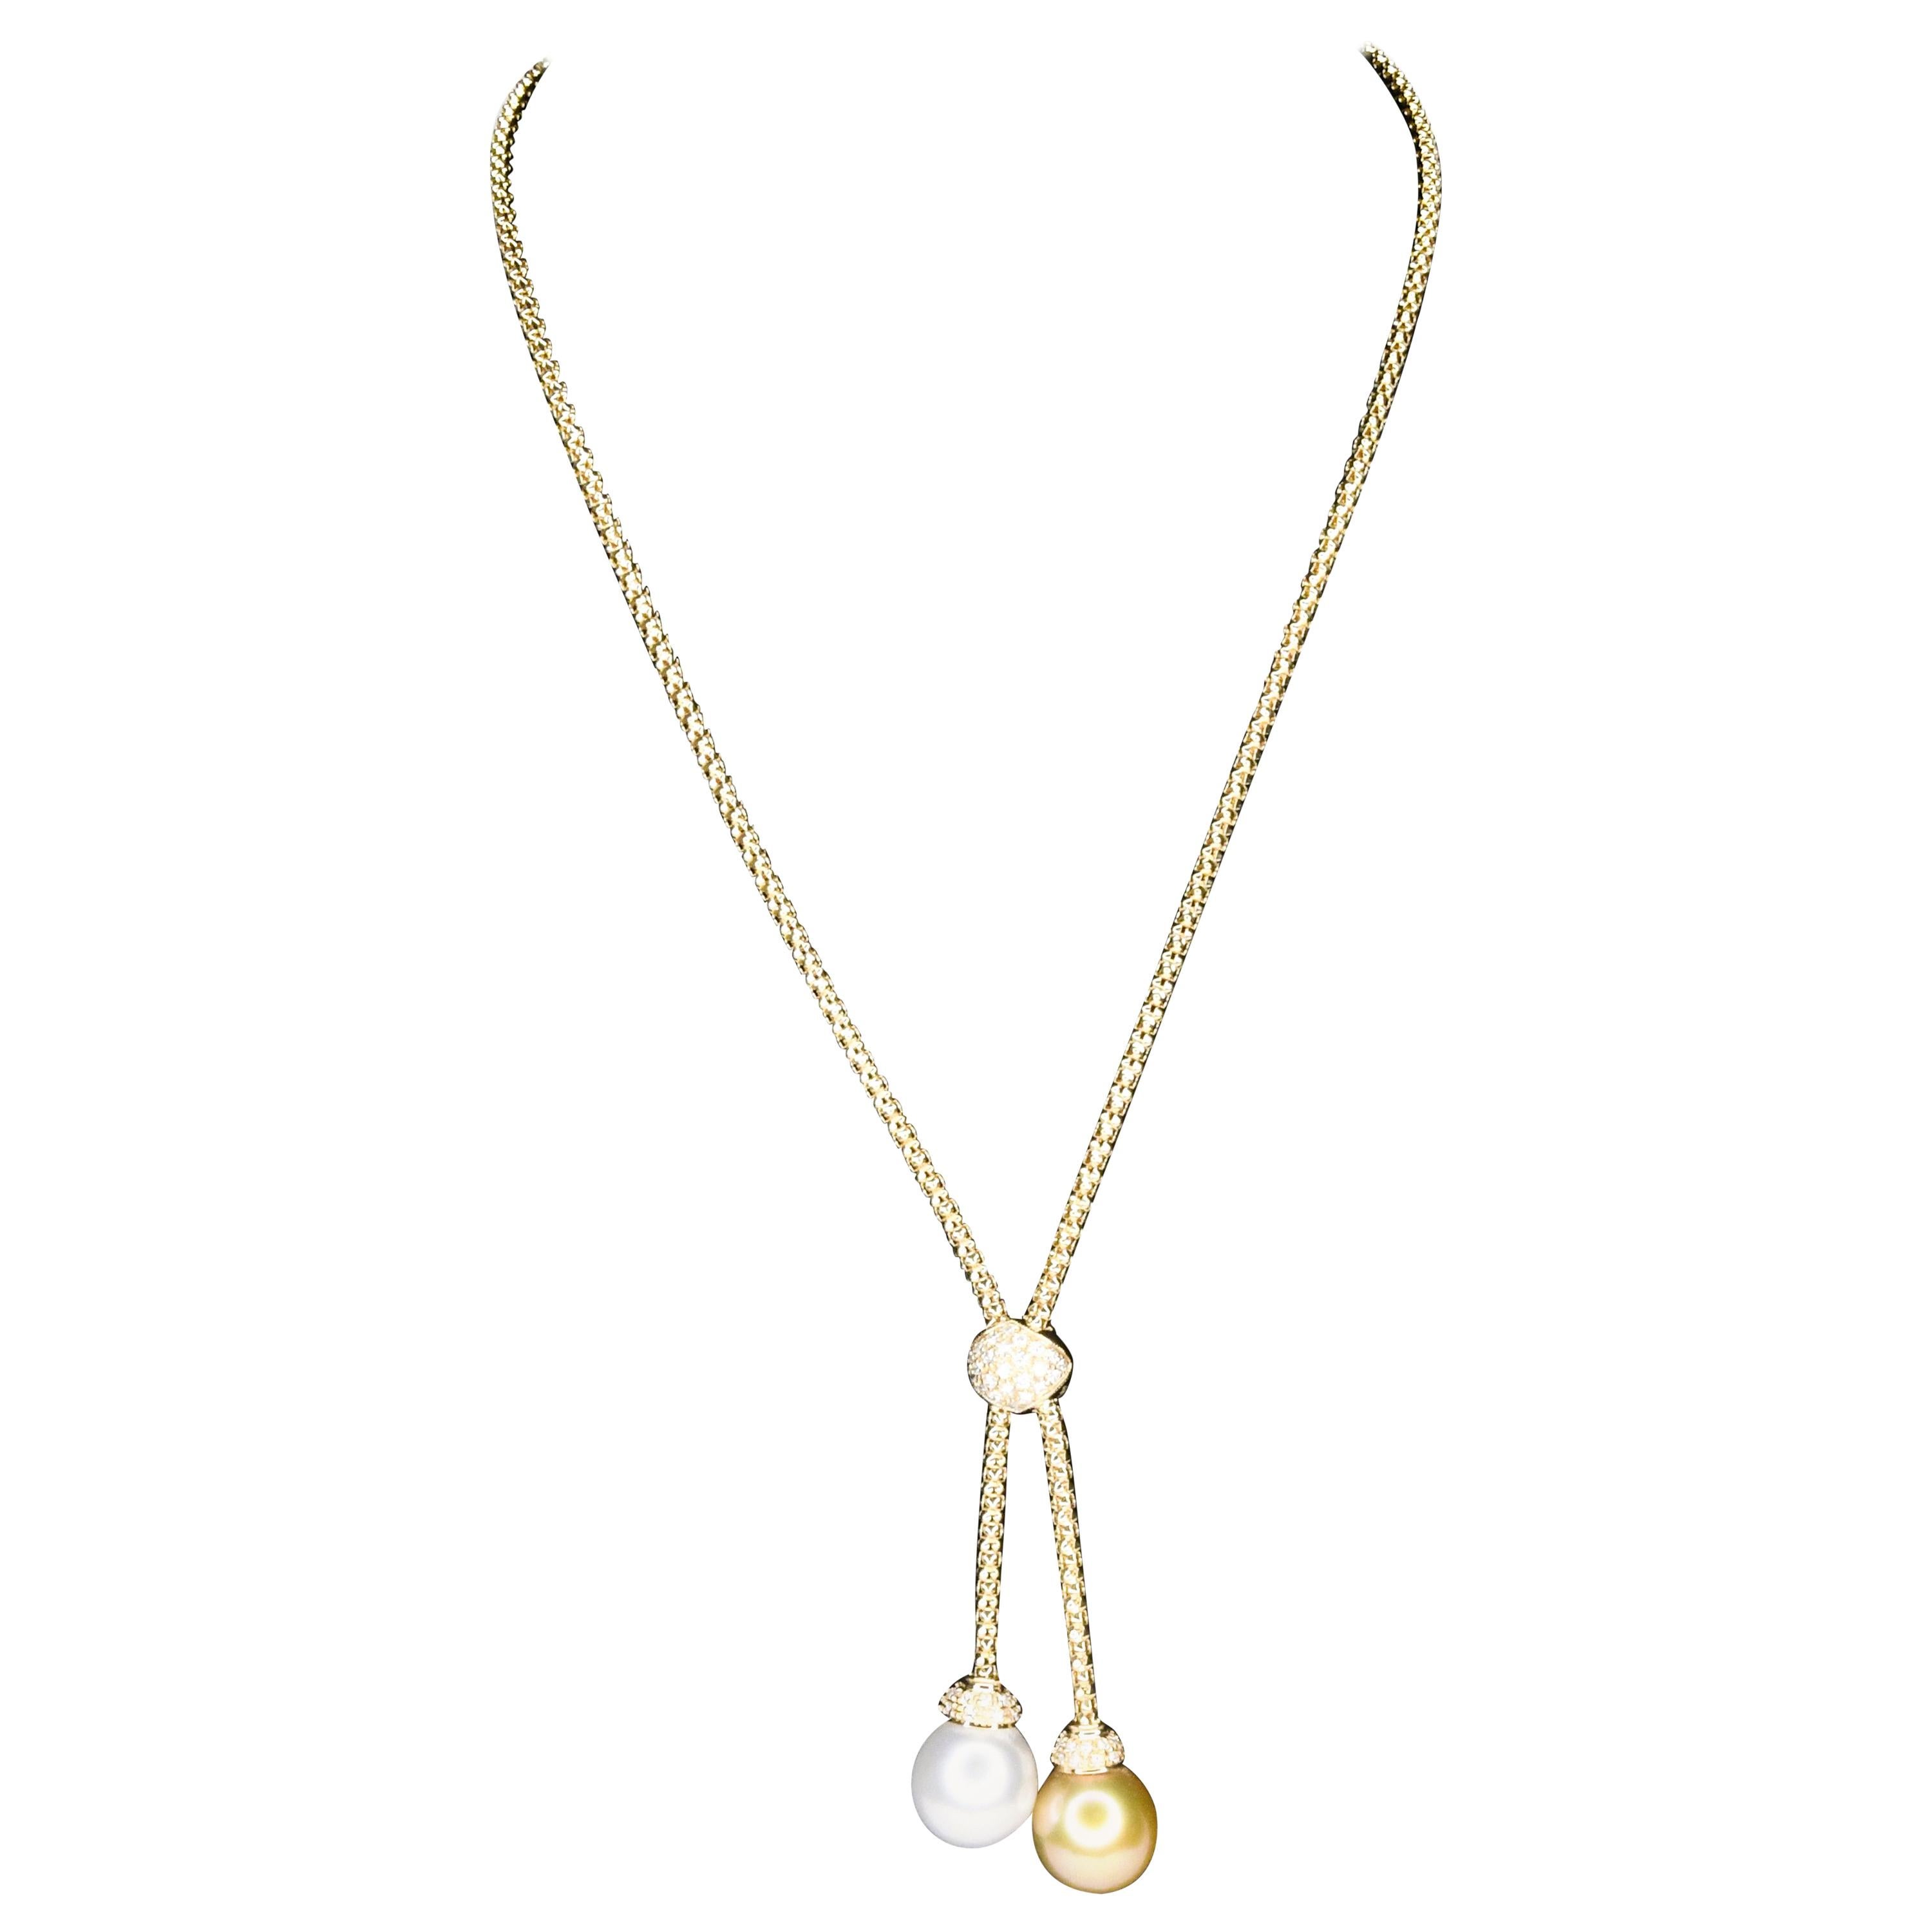 18 Karat Gold South Sea Pearl, White South Sea Pearl and Diamonds Necklace